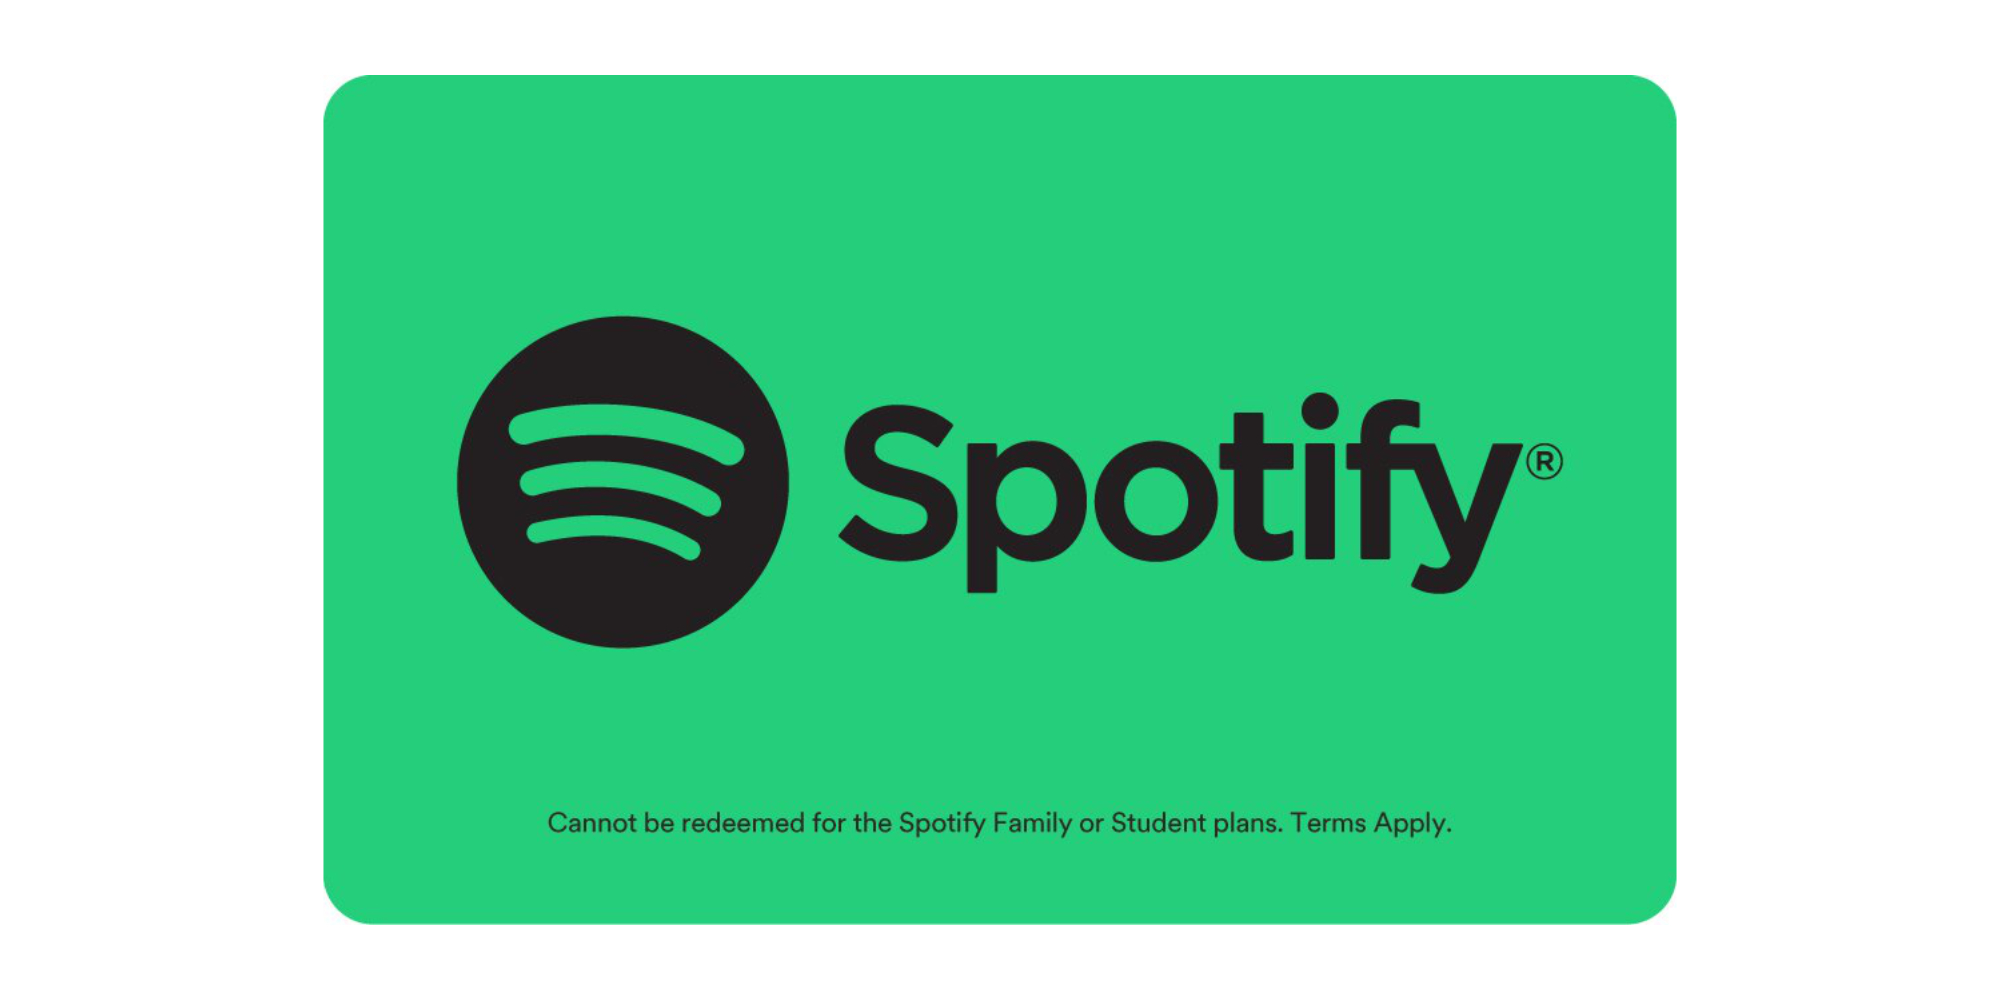 is spotify down right now 2020